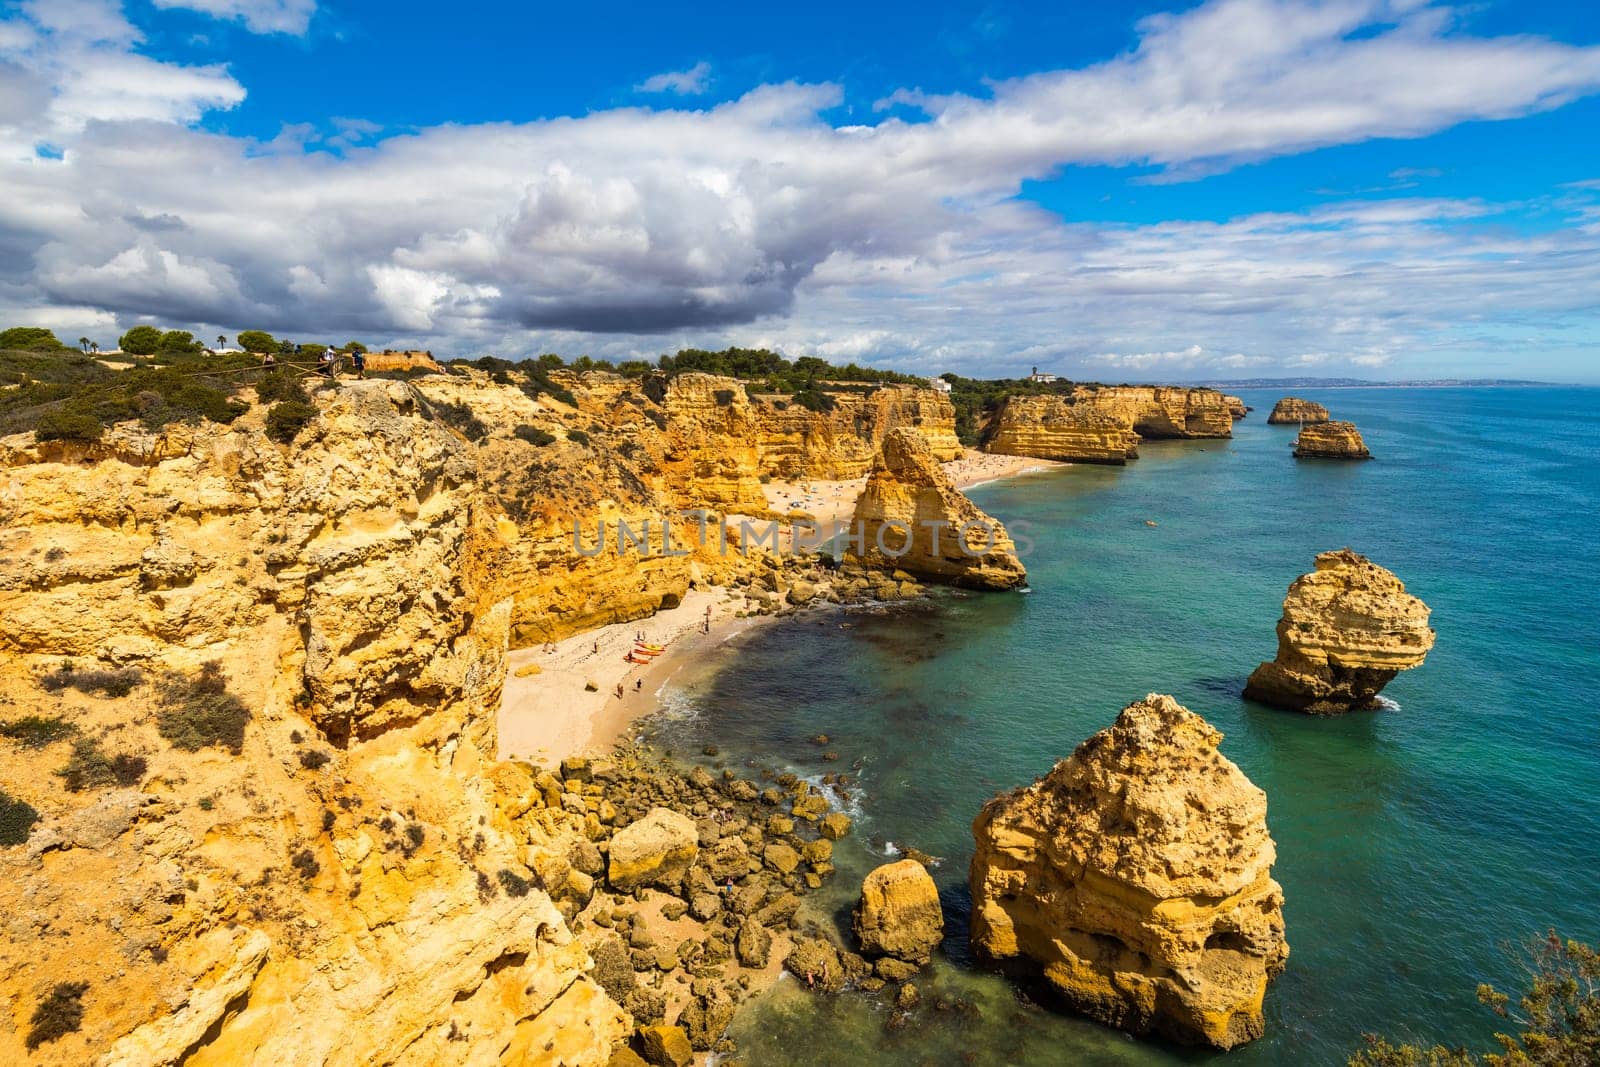 Natural caves at Marinha beach, Algarve Portugal. Rock cliff arches on Marinha beach and turquoise sea water on coast of Portugal in Algarve region. 